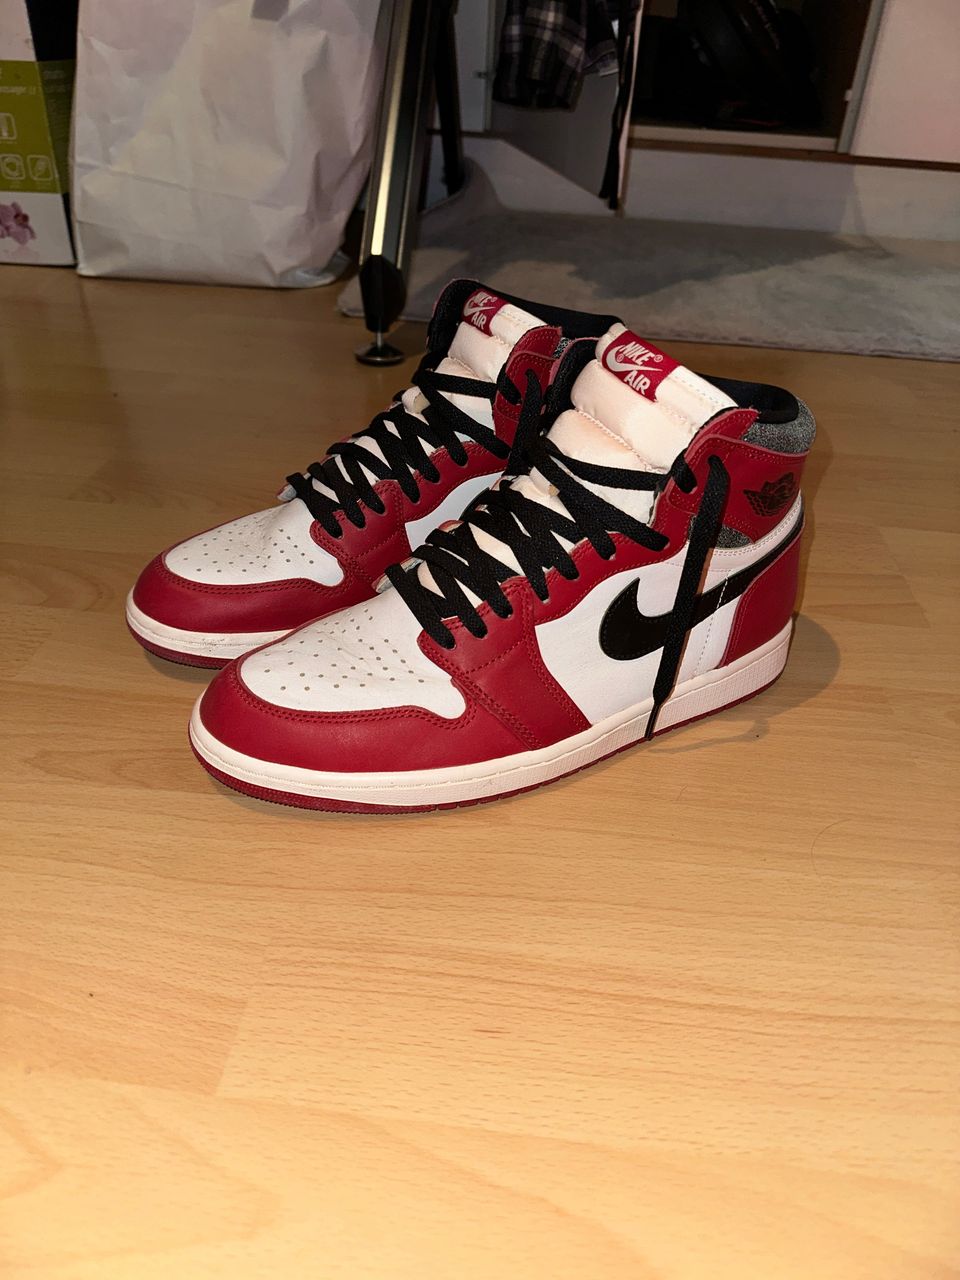 Air jordan 1 high lost and found chicago